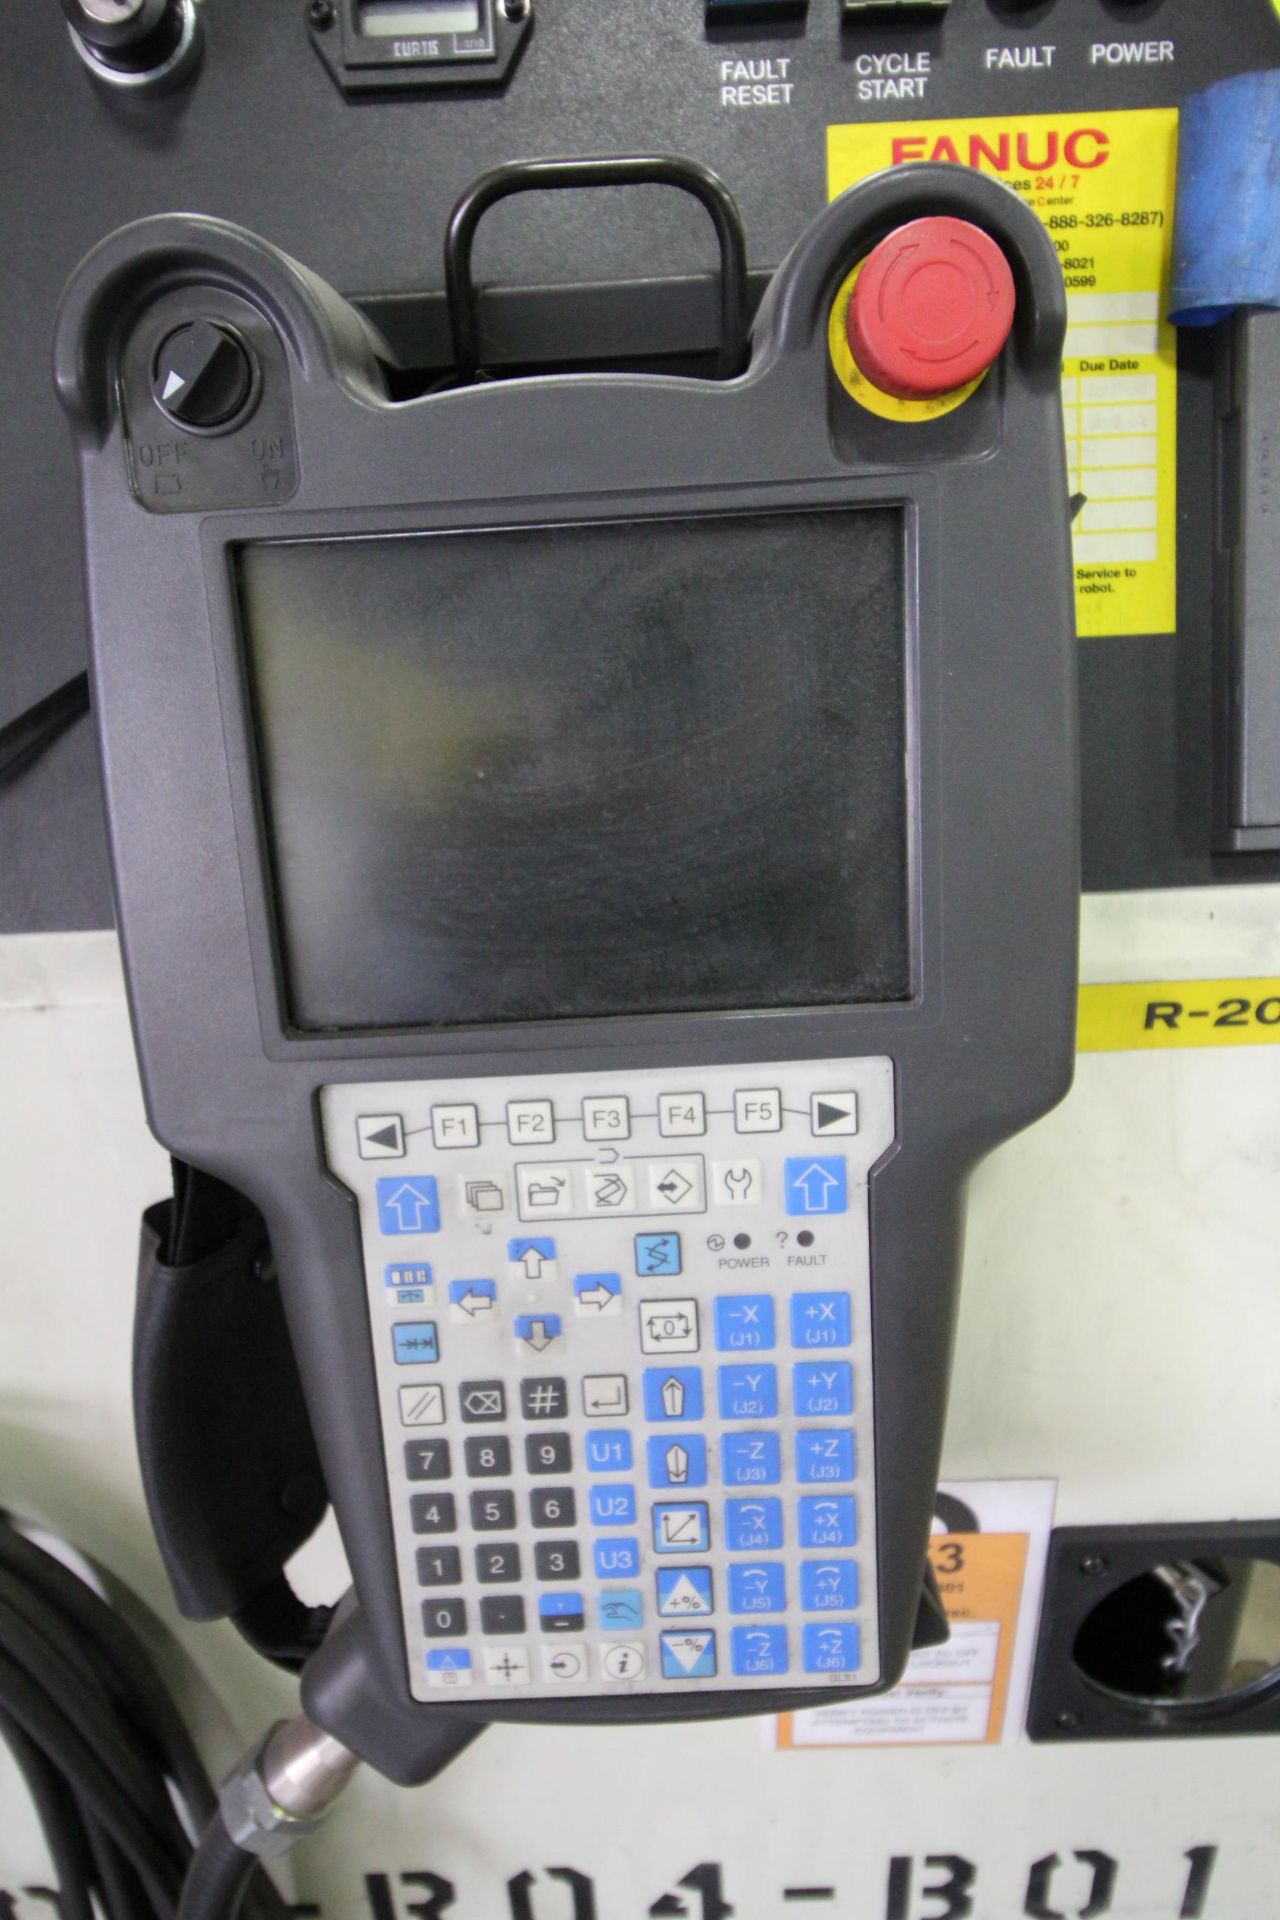 FANUC ROBOT R-2000iB/210F WITH R-30iA CONTROL, CABLES & TEACH PENDANT, SN 148715, YEAR 2014 - Image 7 of 8